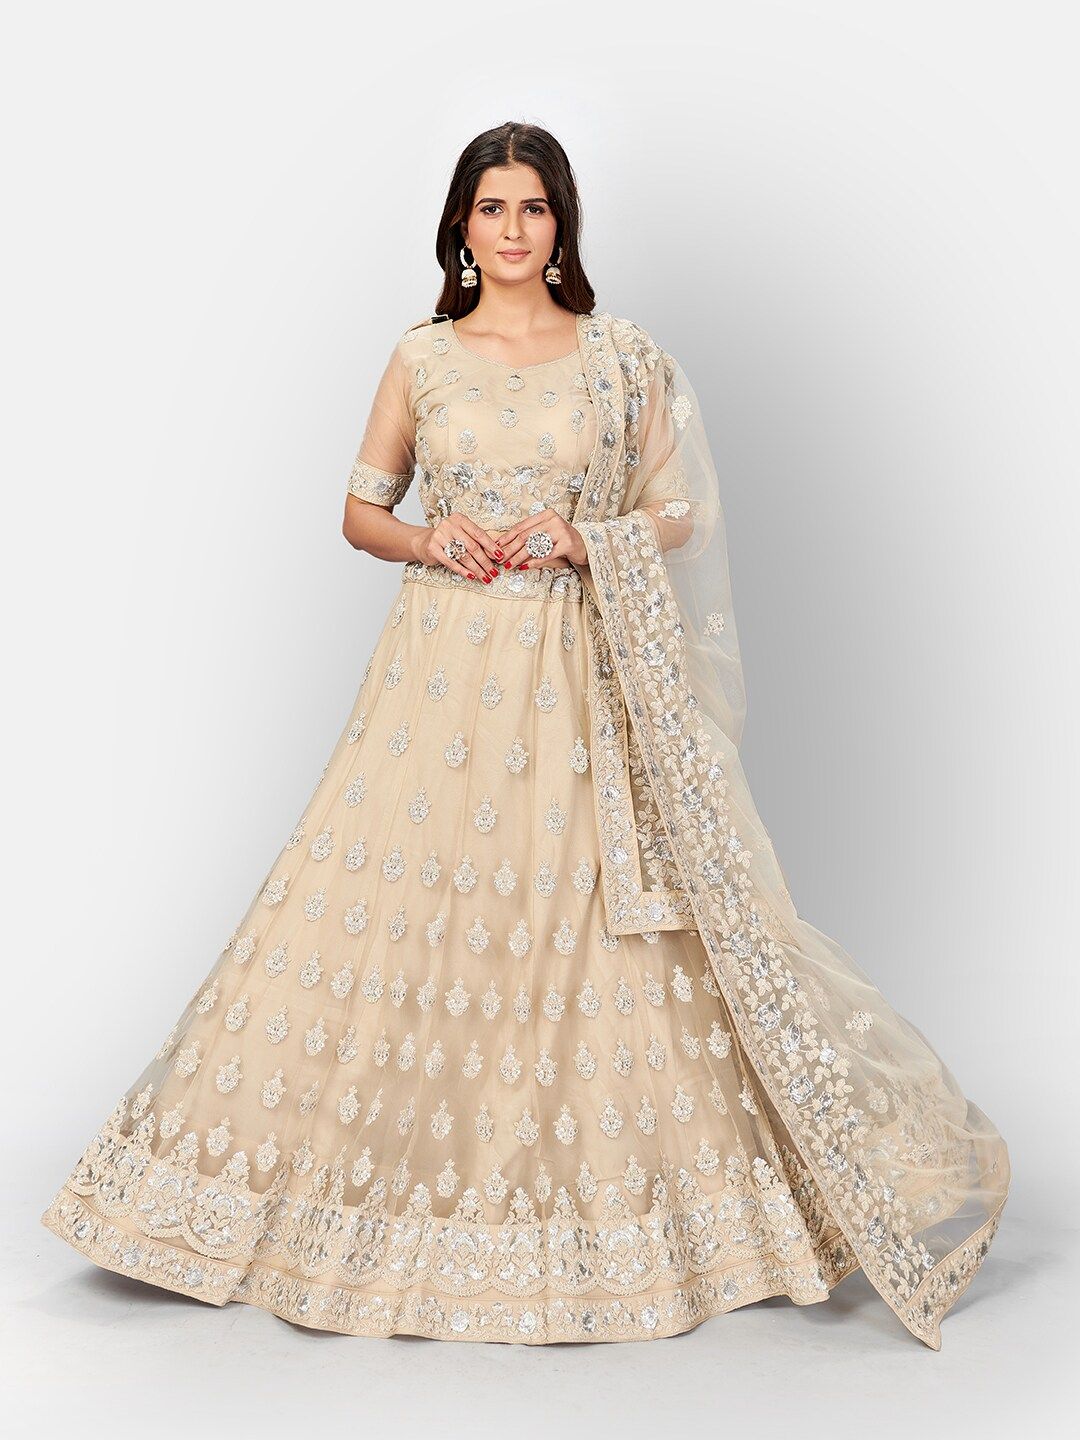 SHOPGARB Beige & Silver-Toned Embroidered Thread Work Semi-Stitched Lehenga & Unstitched Blouse With Dupatta Price in India